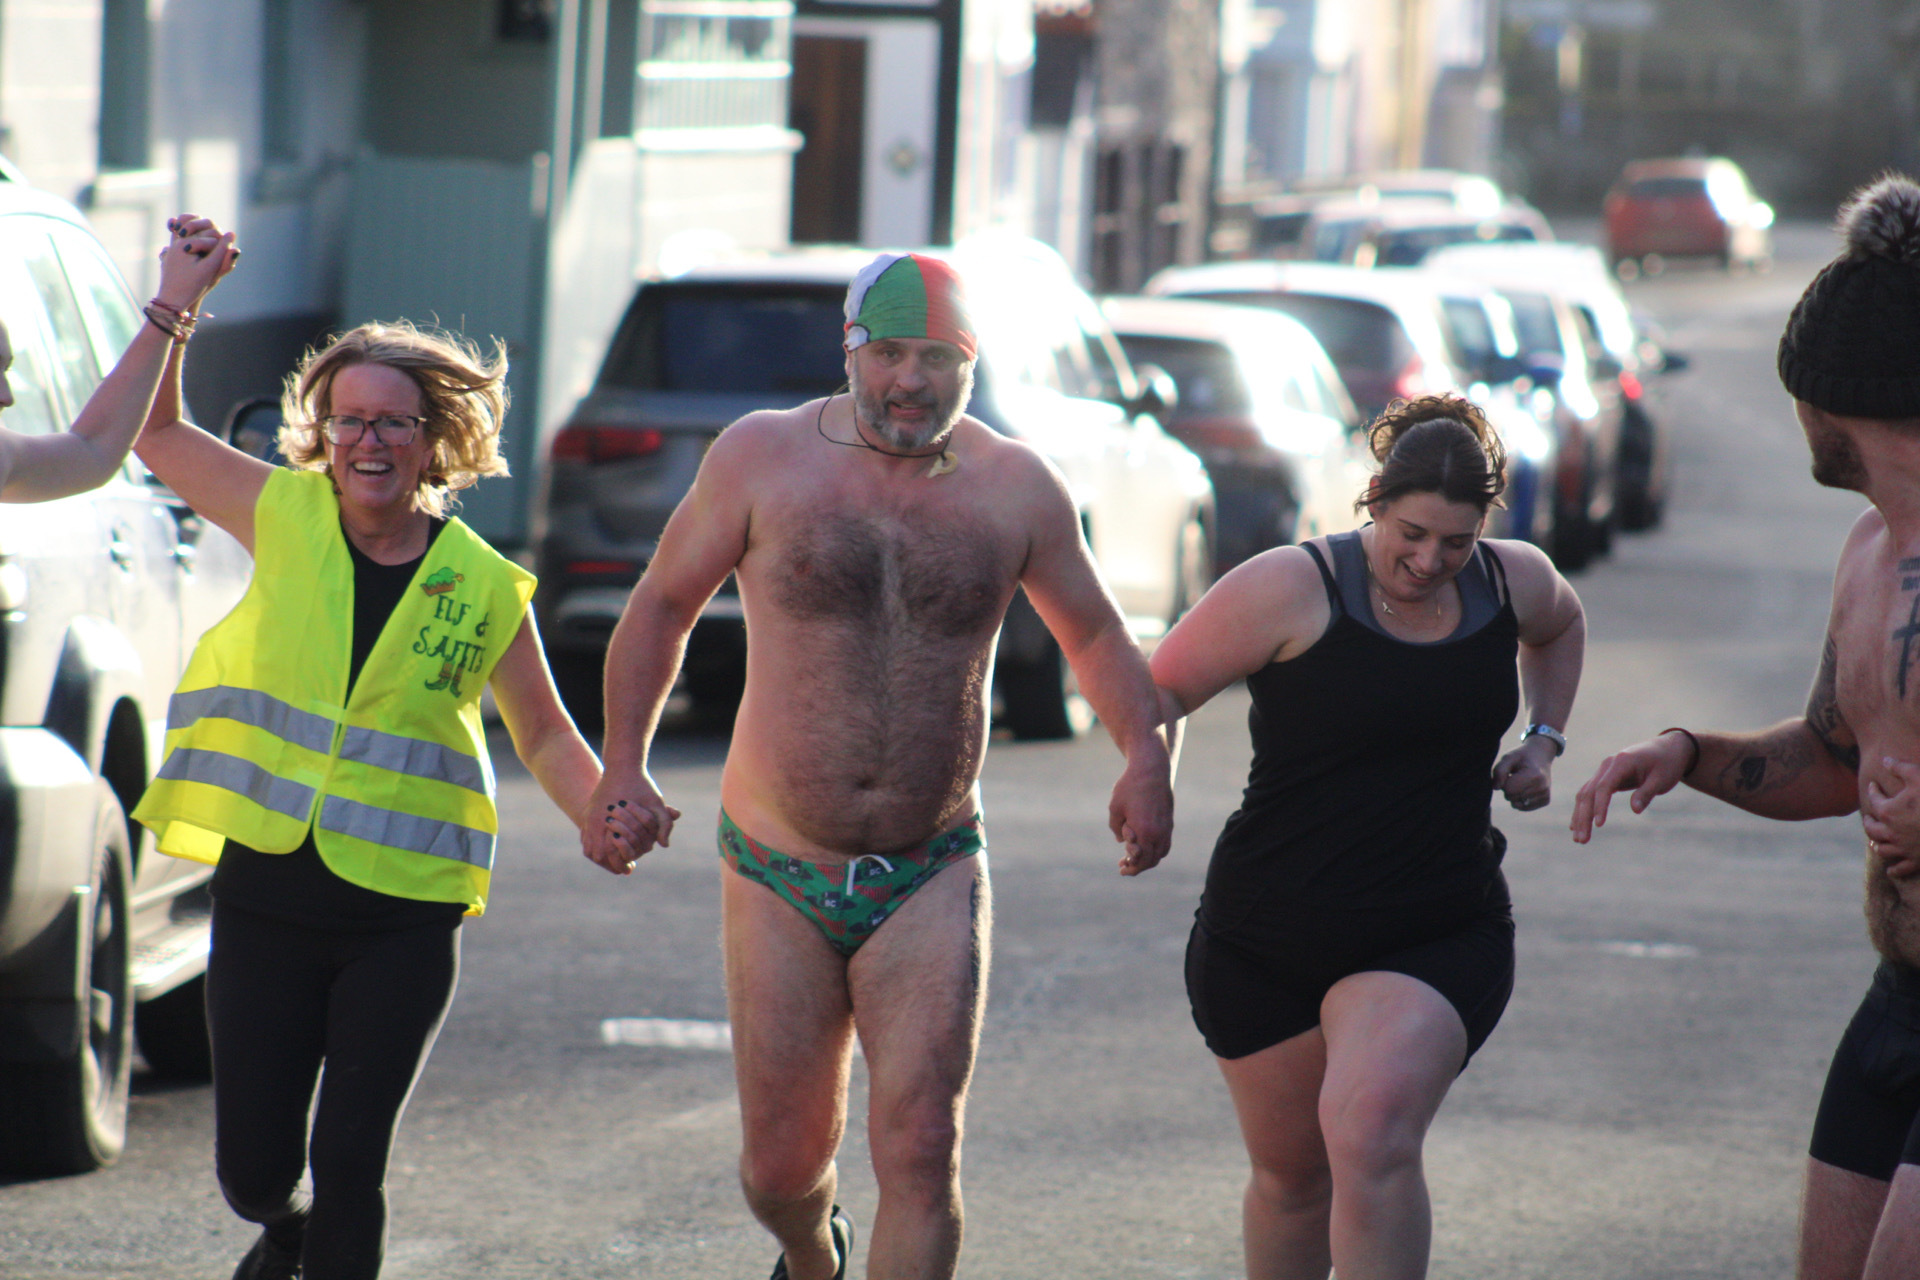 Rachel Gee, Dylans father Darren Price and Emma Hockley cross the line at the second annual Boxing Day underwear run in aid of The Dylan Price Foundation. Picture by Jack Butler-Jones